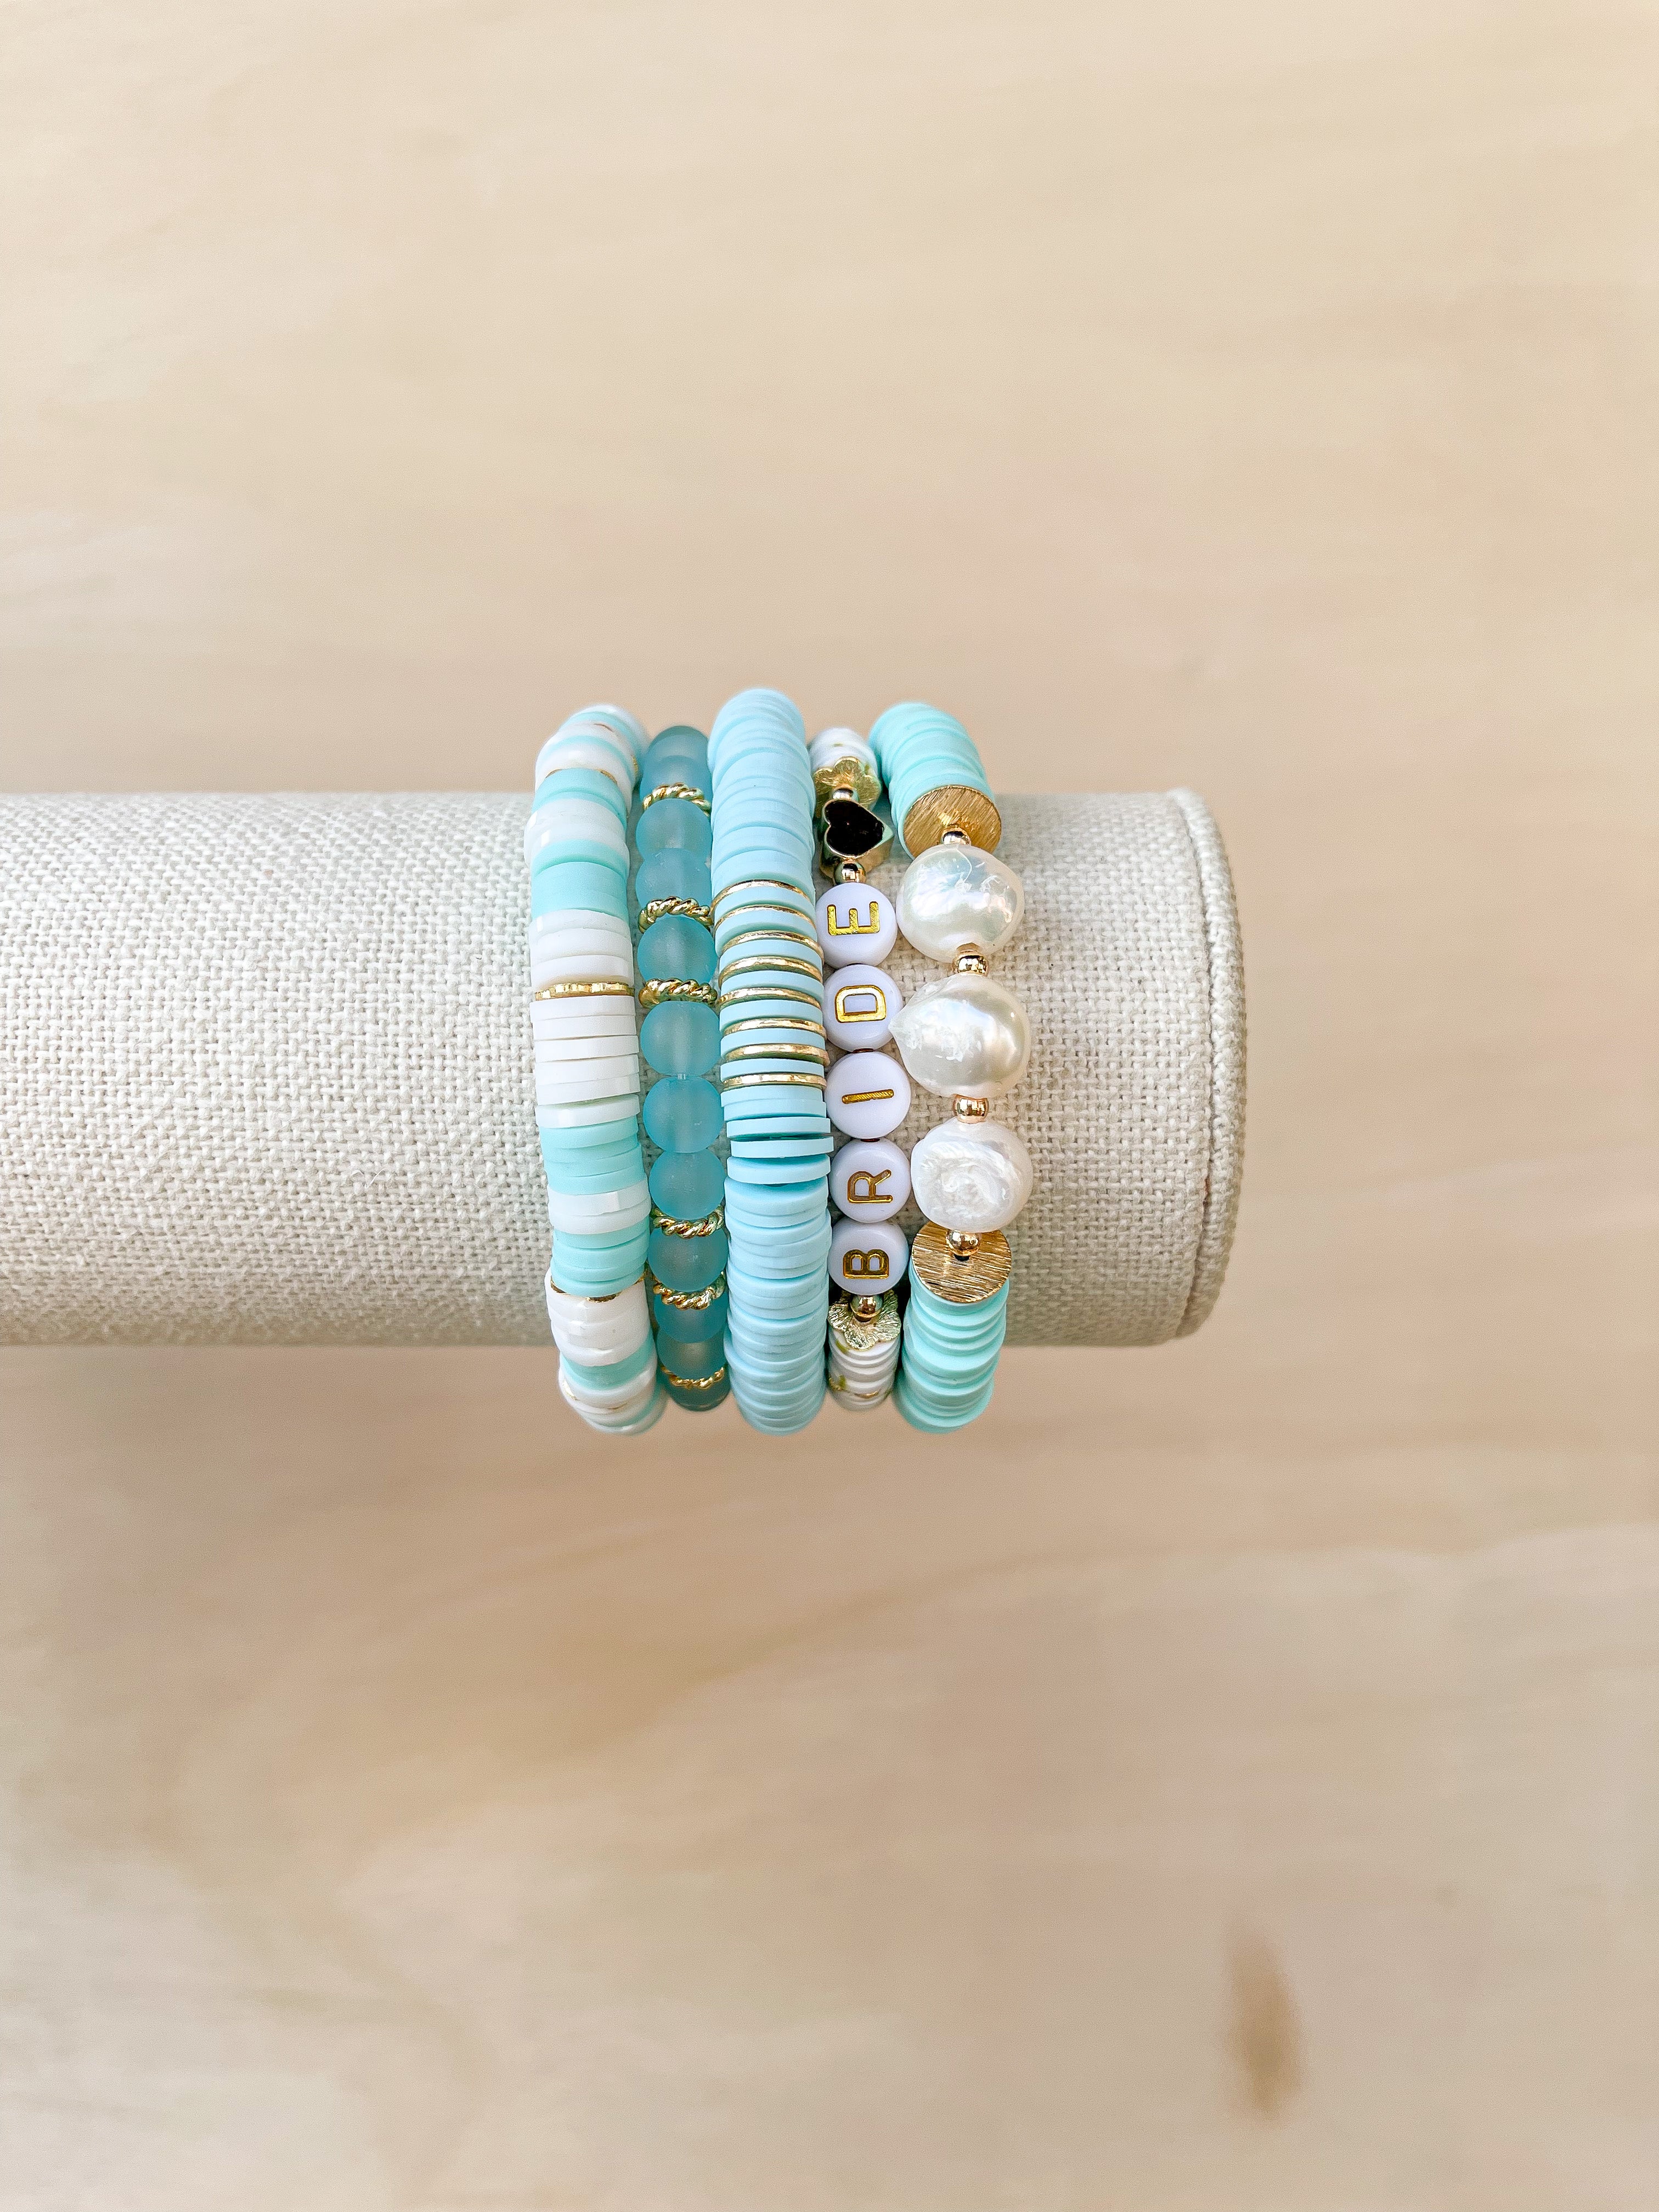 Handmade bracelet, locally made, soft clay bead, stretch bracelet, teal, white beads, paired with some other Callie favorite bracelets